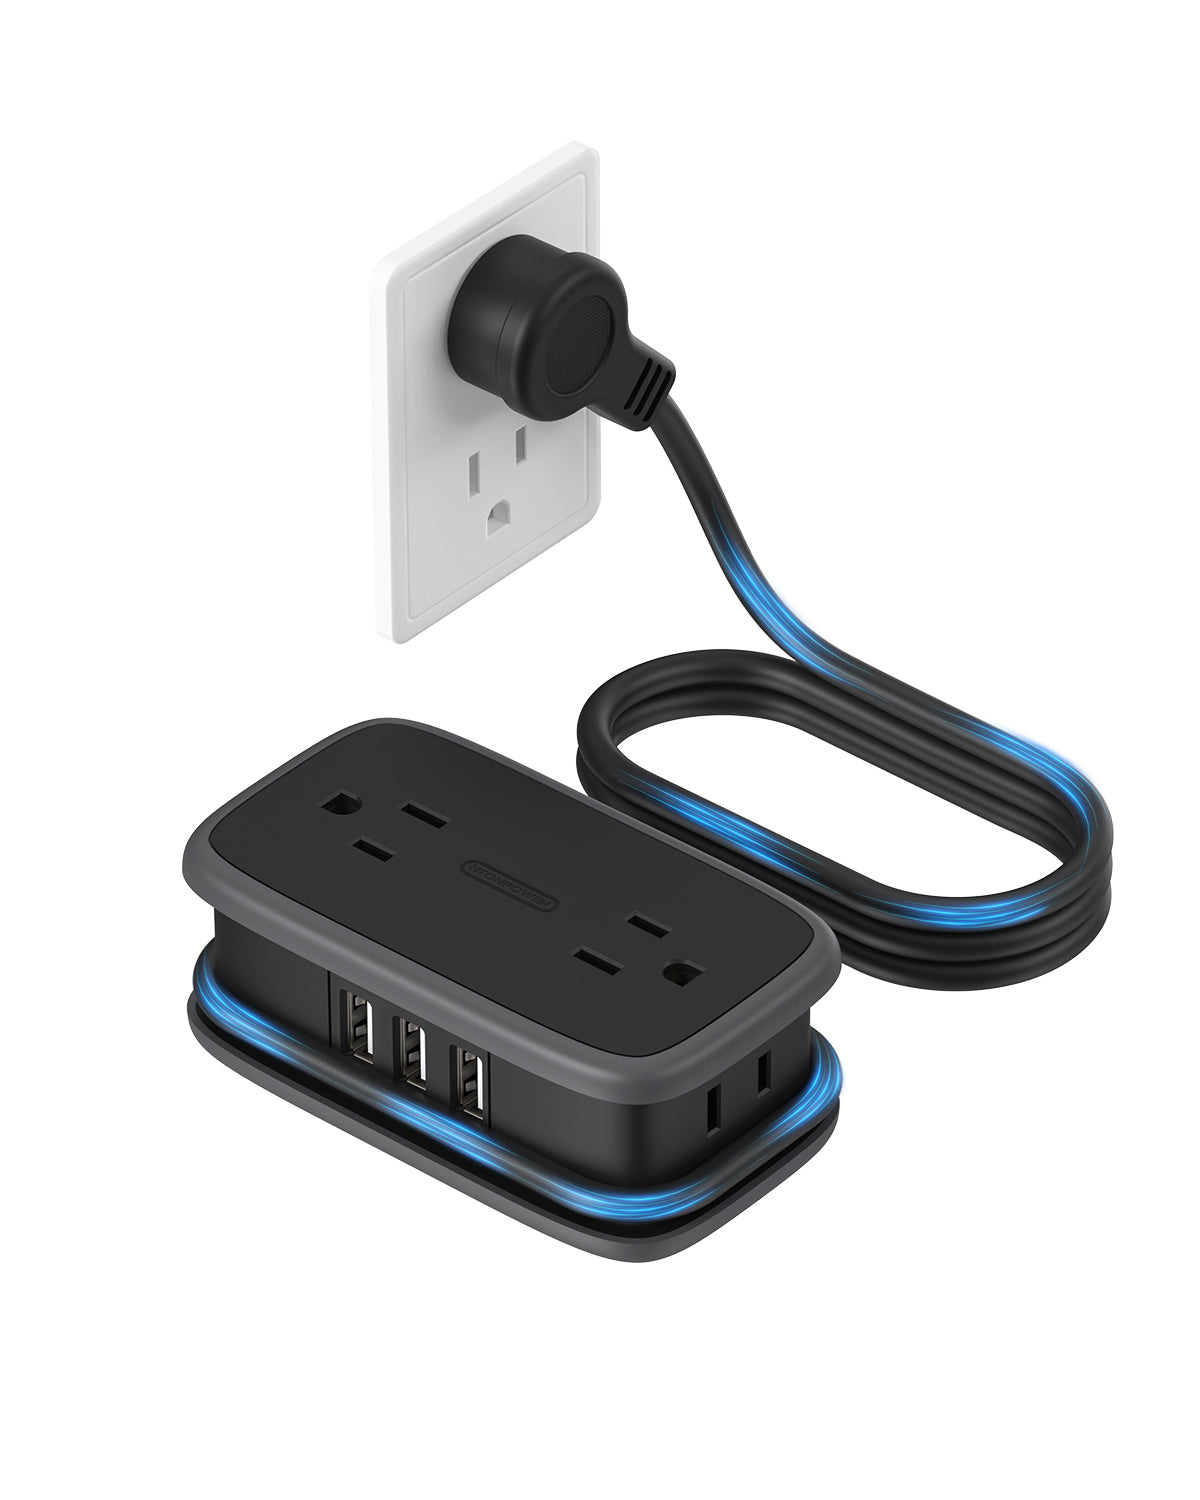 Ntonpower Pocket Power Strip 4 Outlets 3 USB Ports